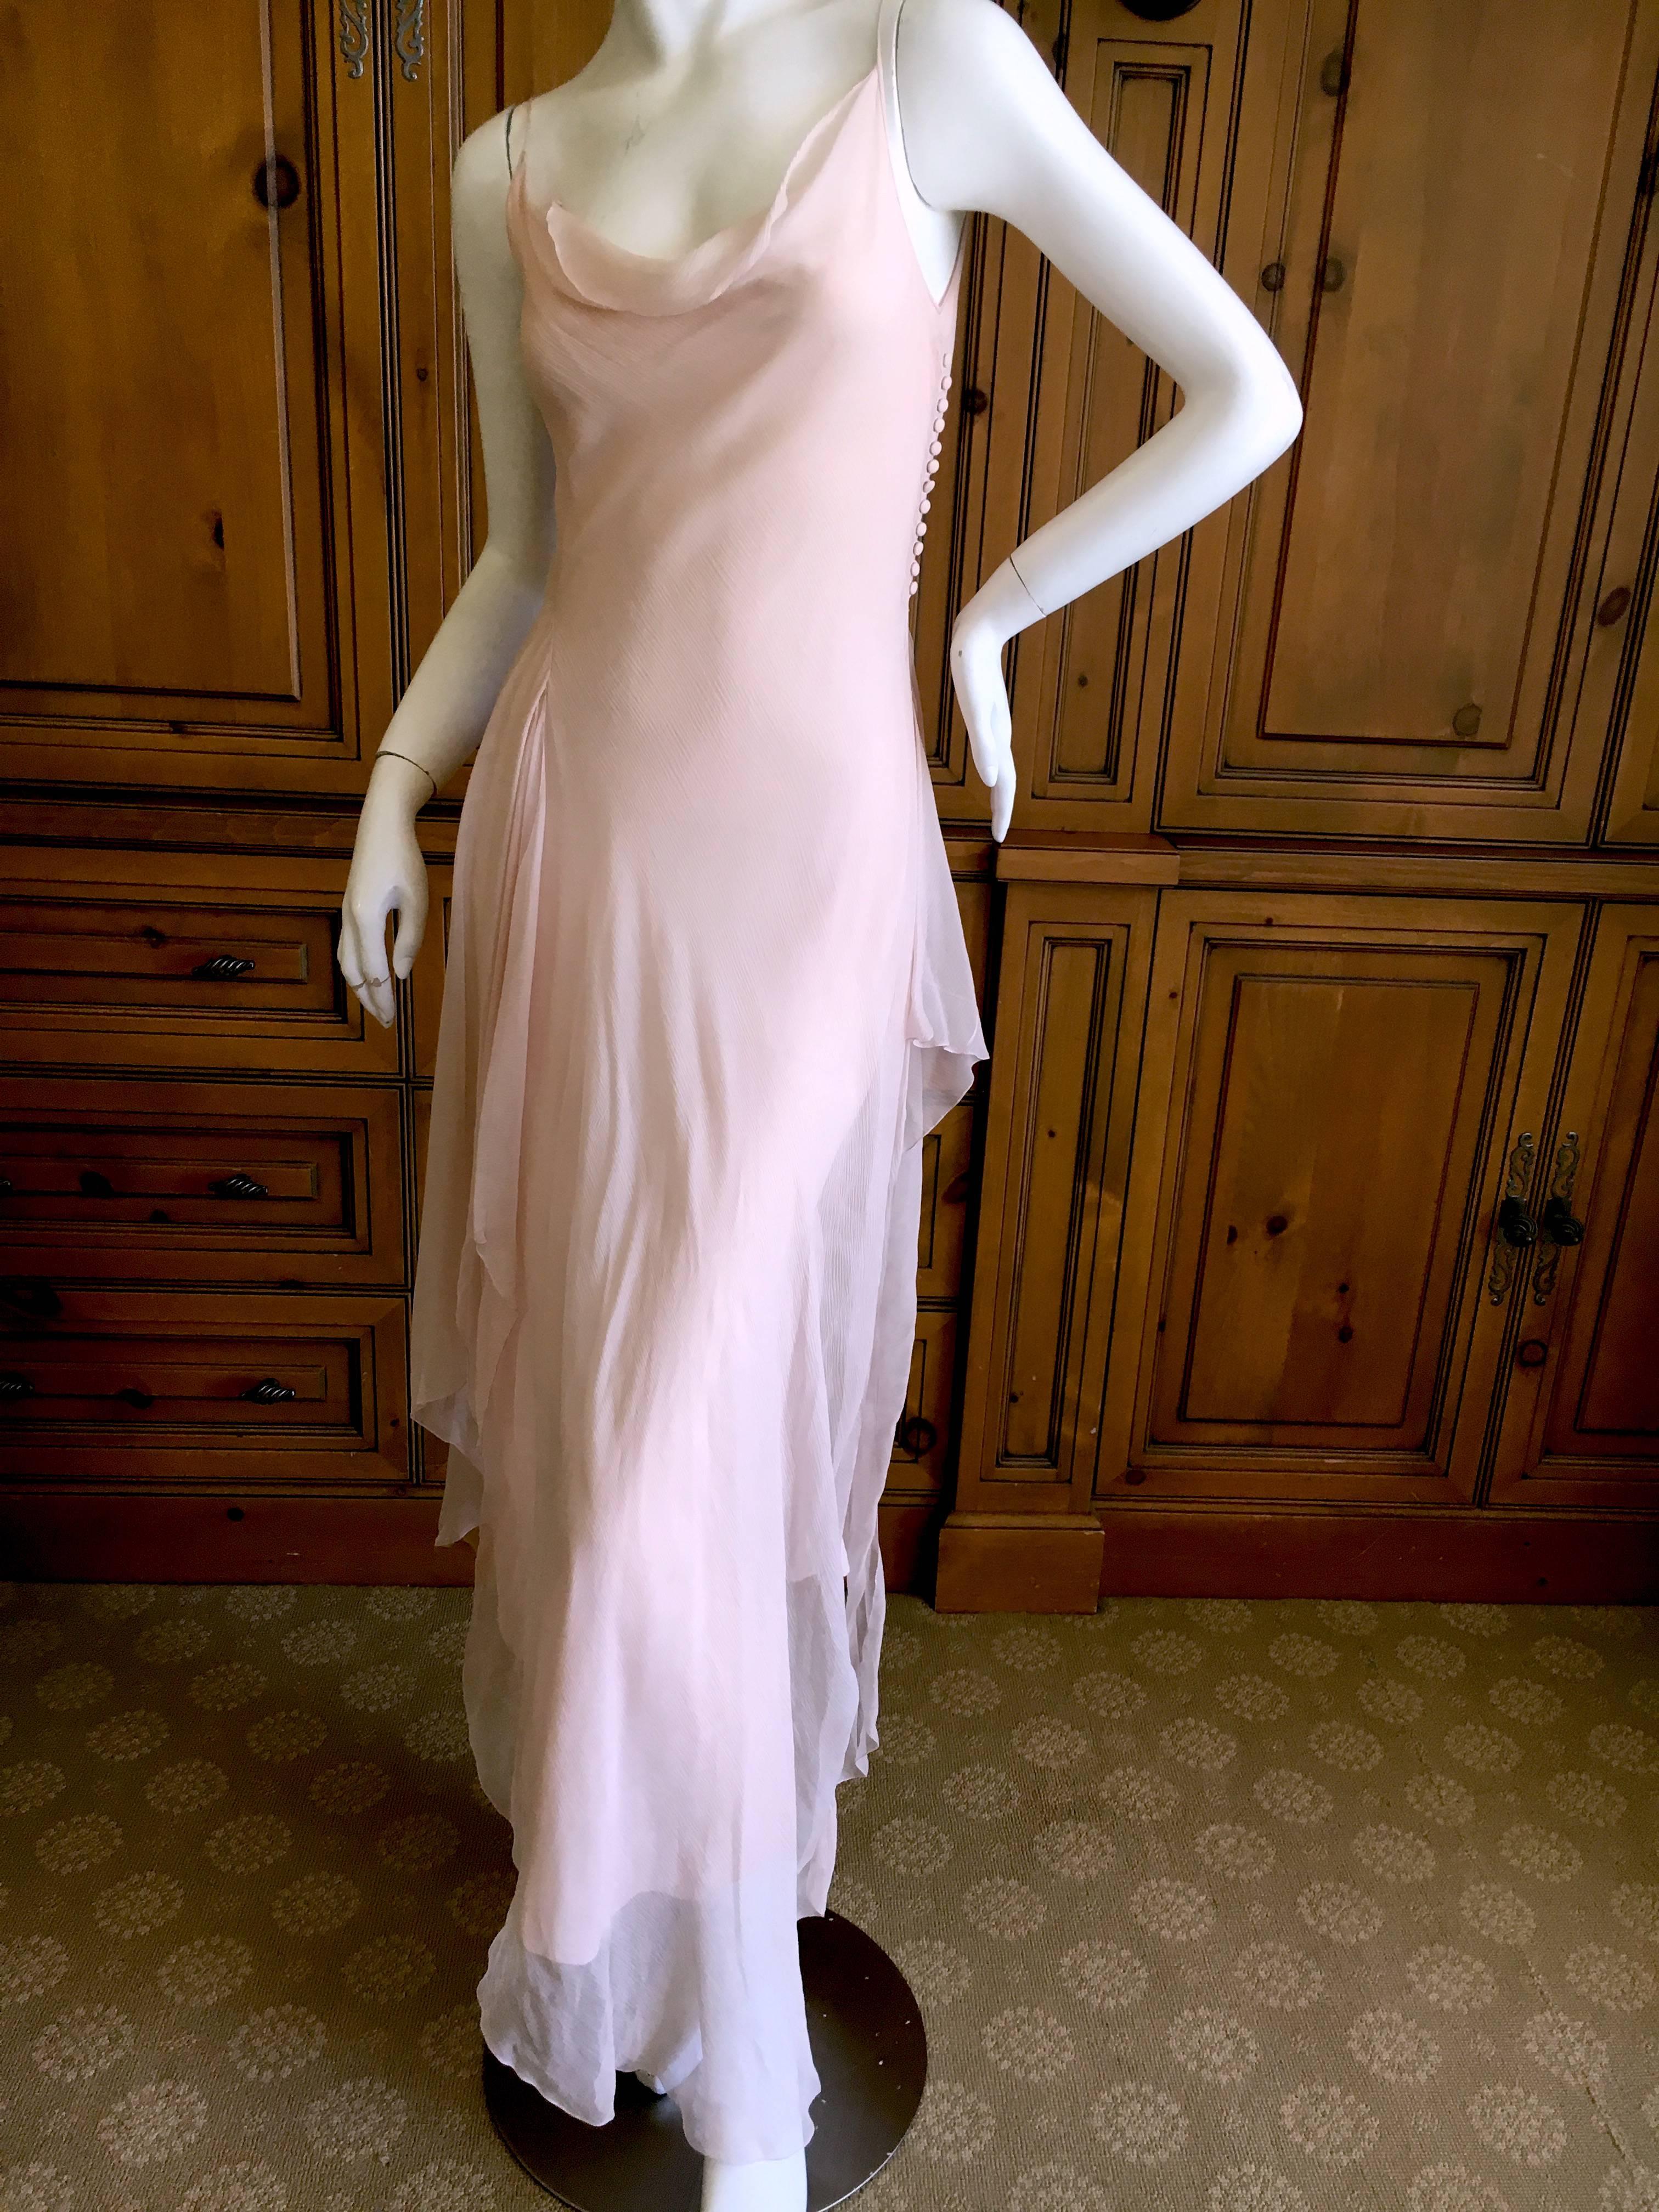 Divine diaphanous blush silk chiffon dress from a very early John Galliano.
This is an early label, when his pieces were still made in France.
Bias cut with multi layers of draping sheer silk chiffon, this is so pretty on.
There is a lot of stretch